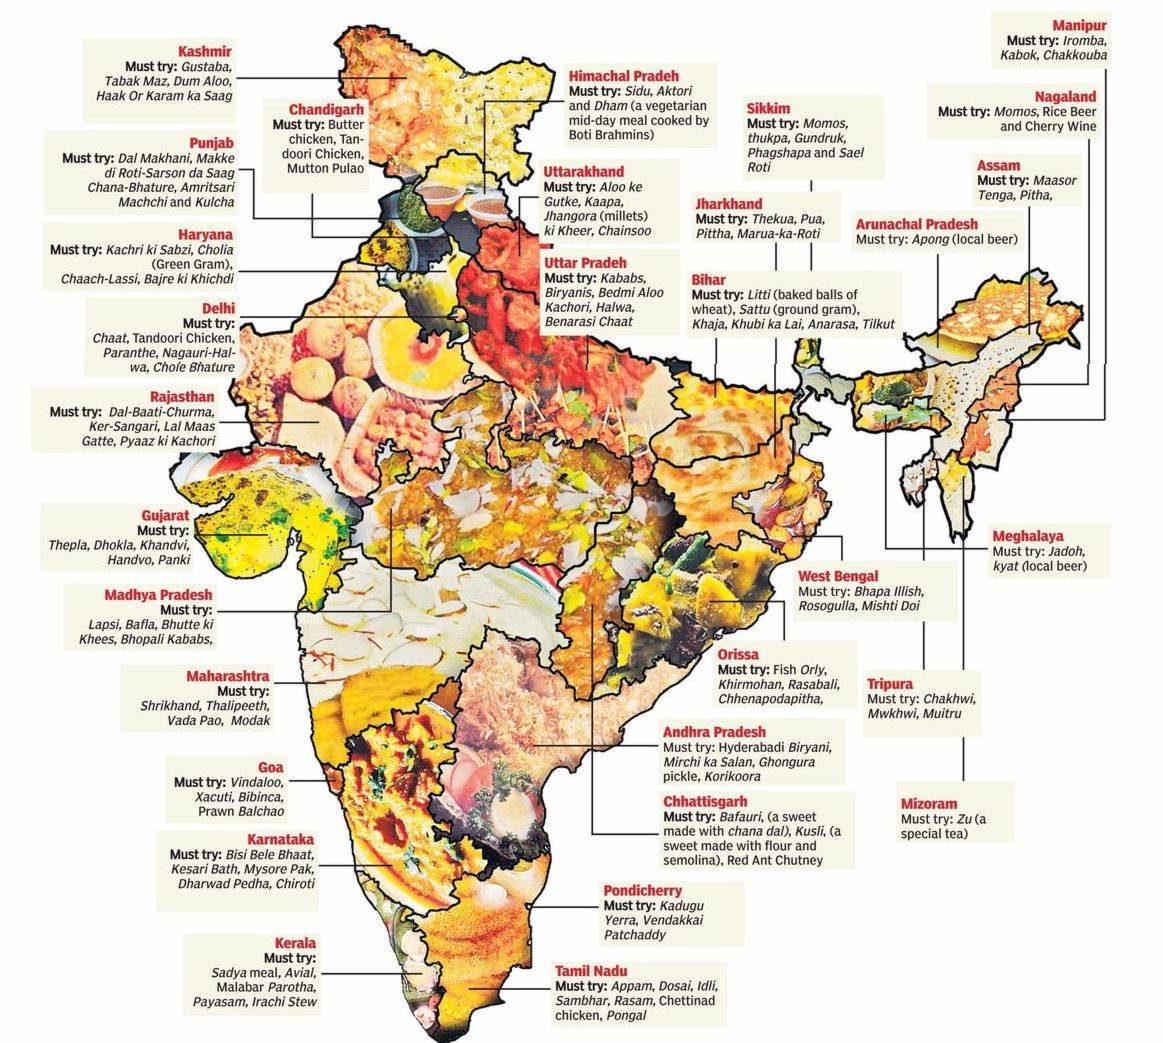 Food Chart Of India Click On The Image To Enlarge